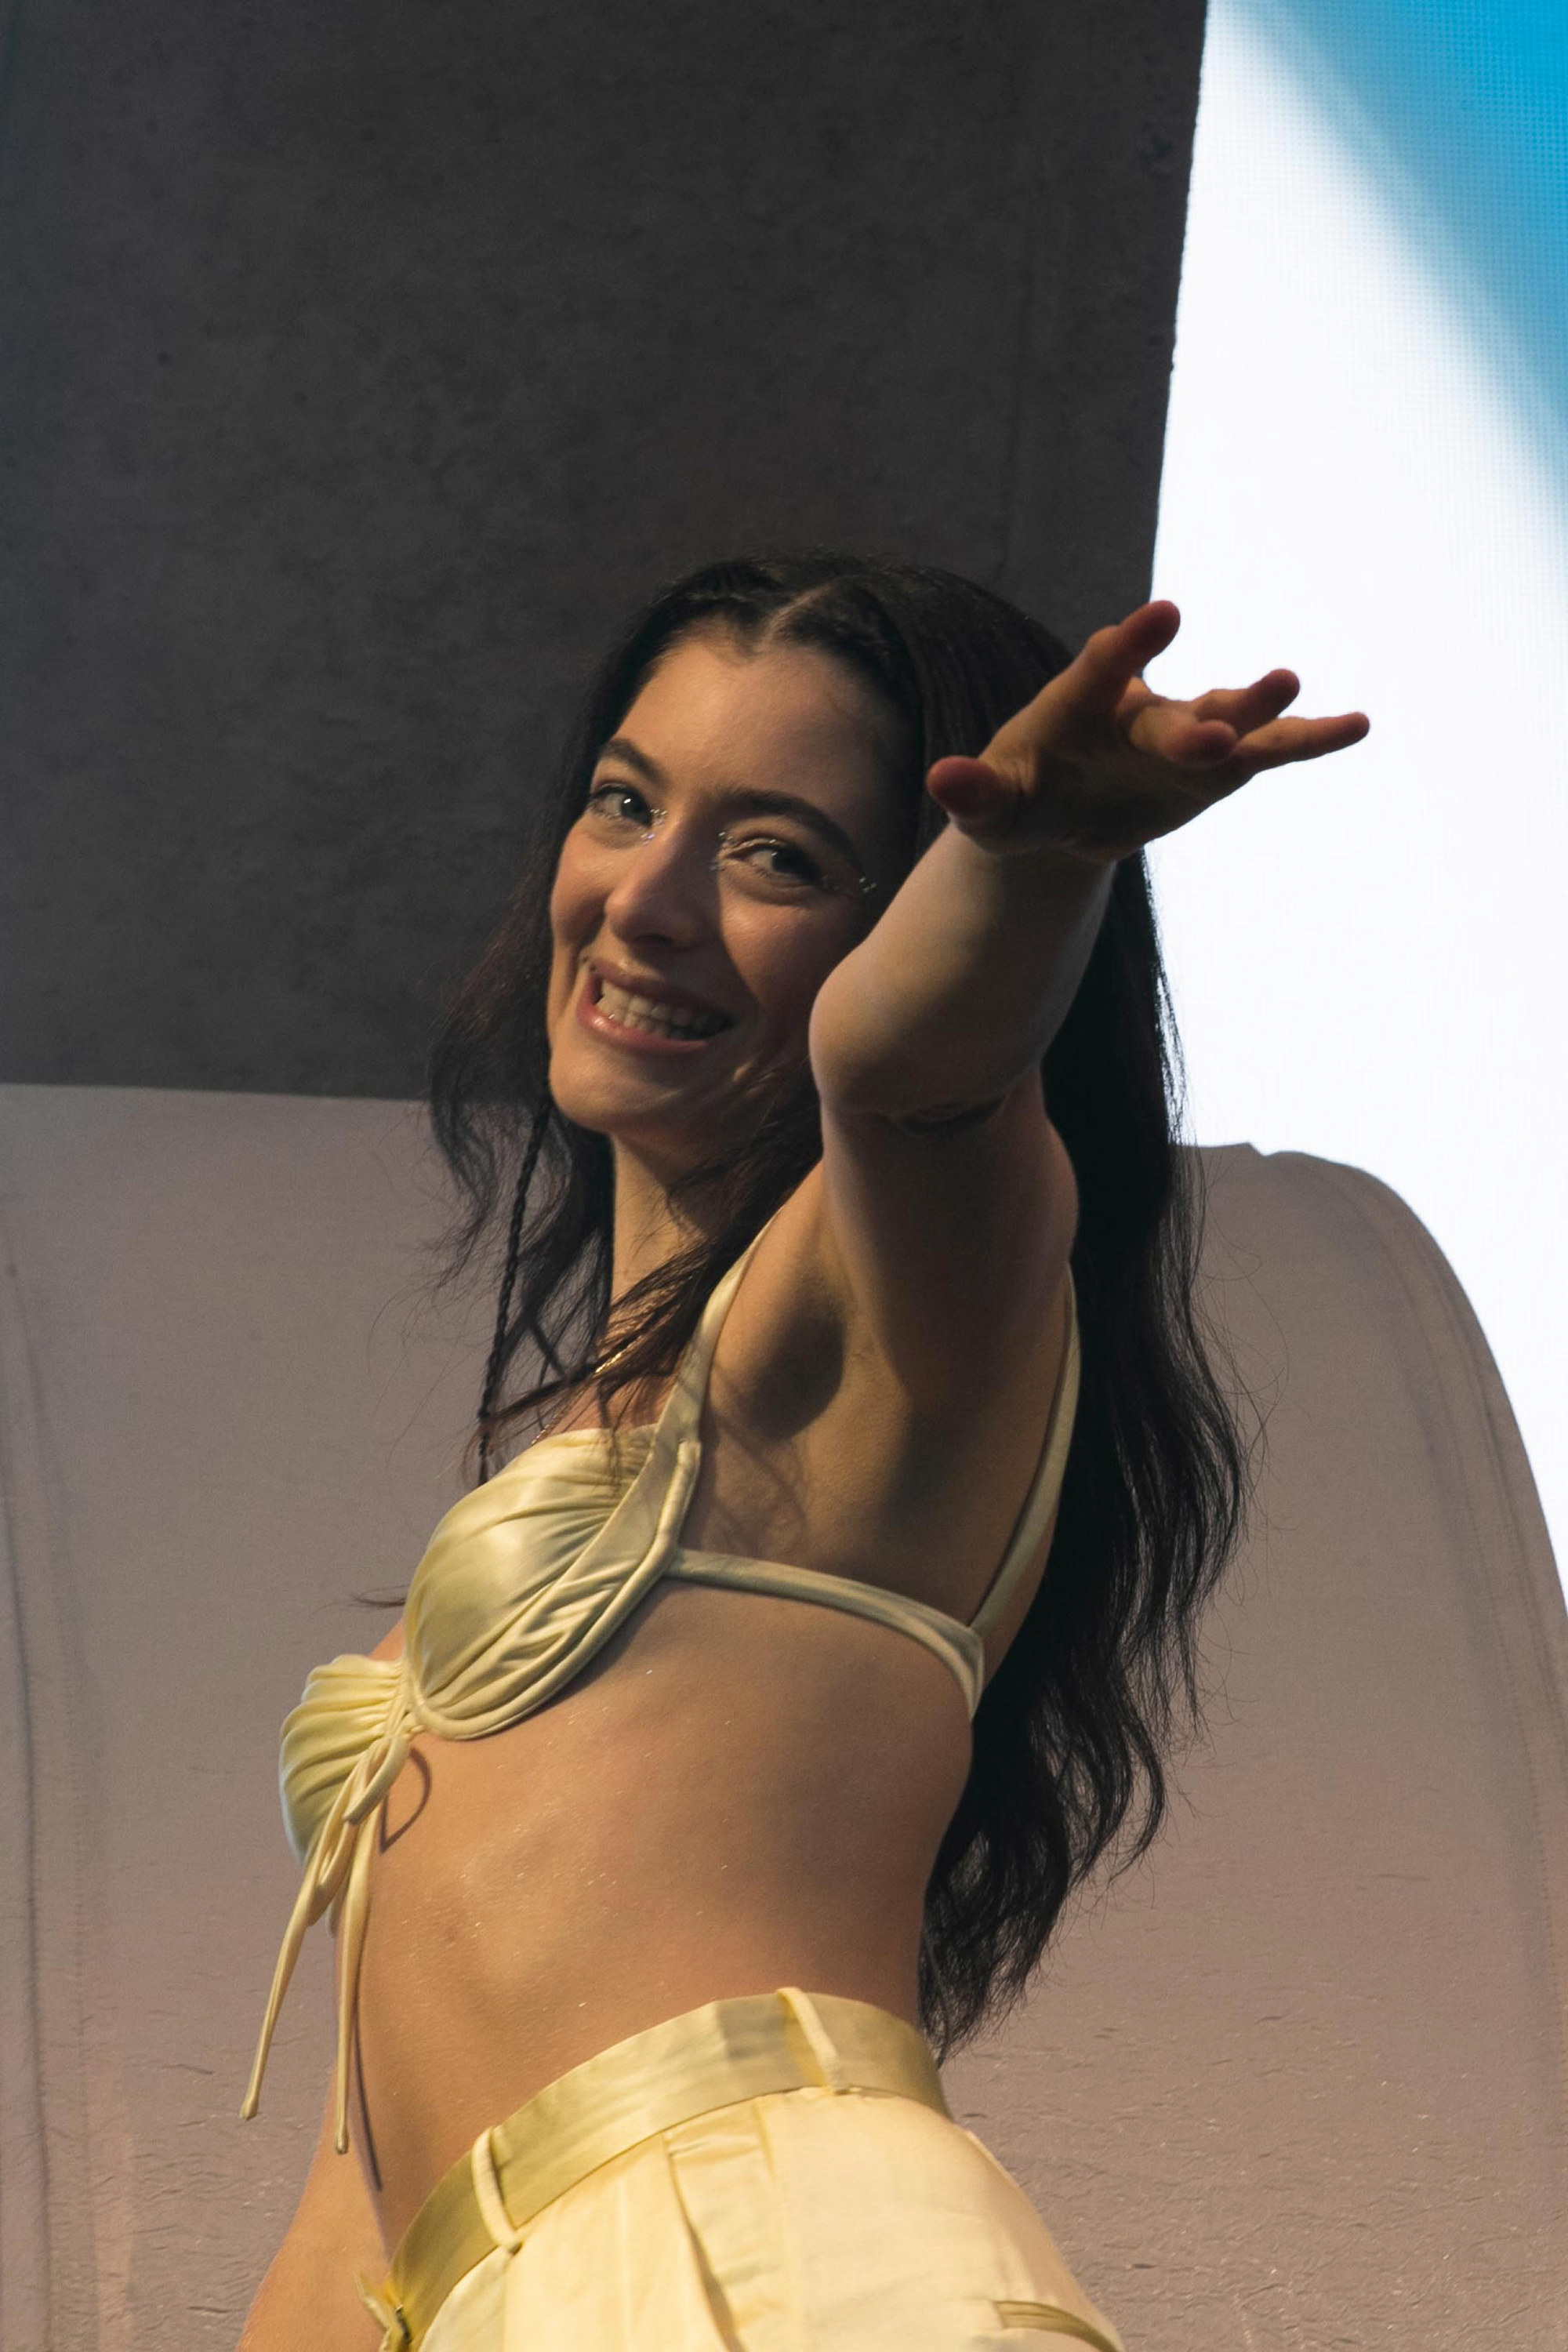 Image of Lorde in a lemon yellow bikini top, grinning and waving from on stage